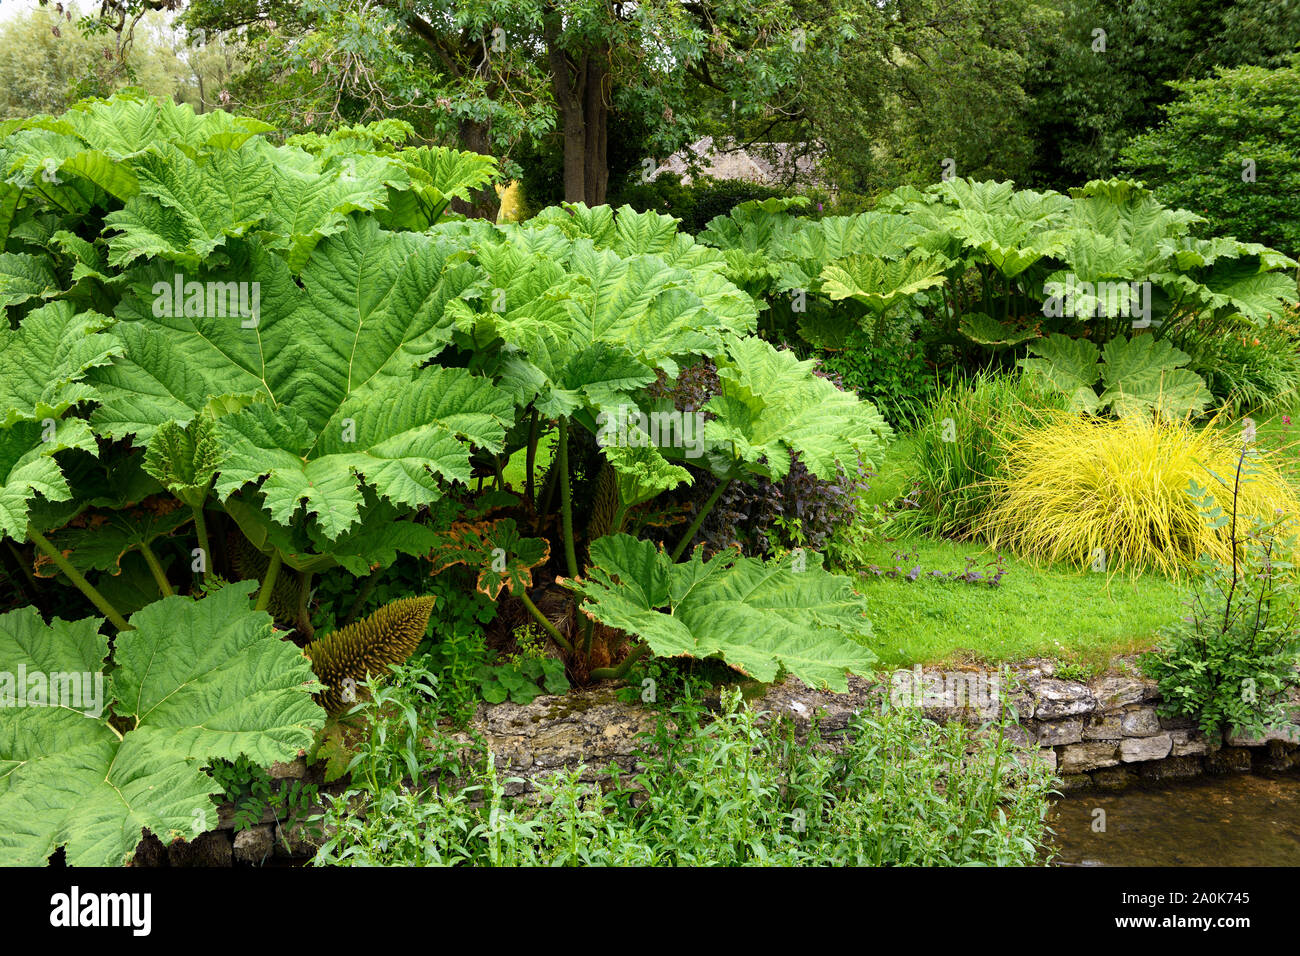 Giant leaves of Gunnera plant on the banks of the River Coln in Bibury Gloucester England Stock Photo